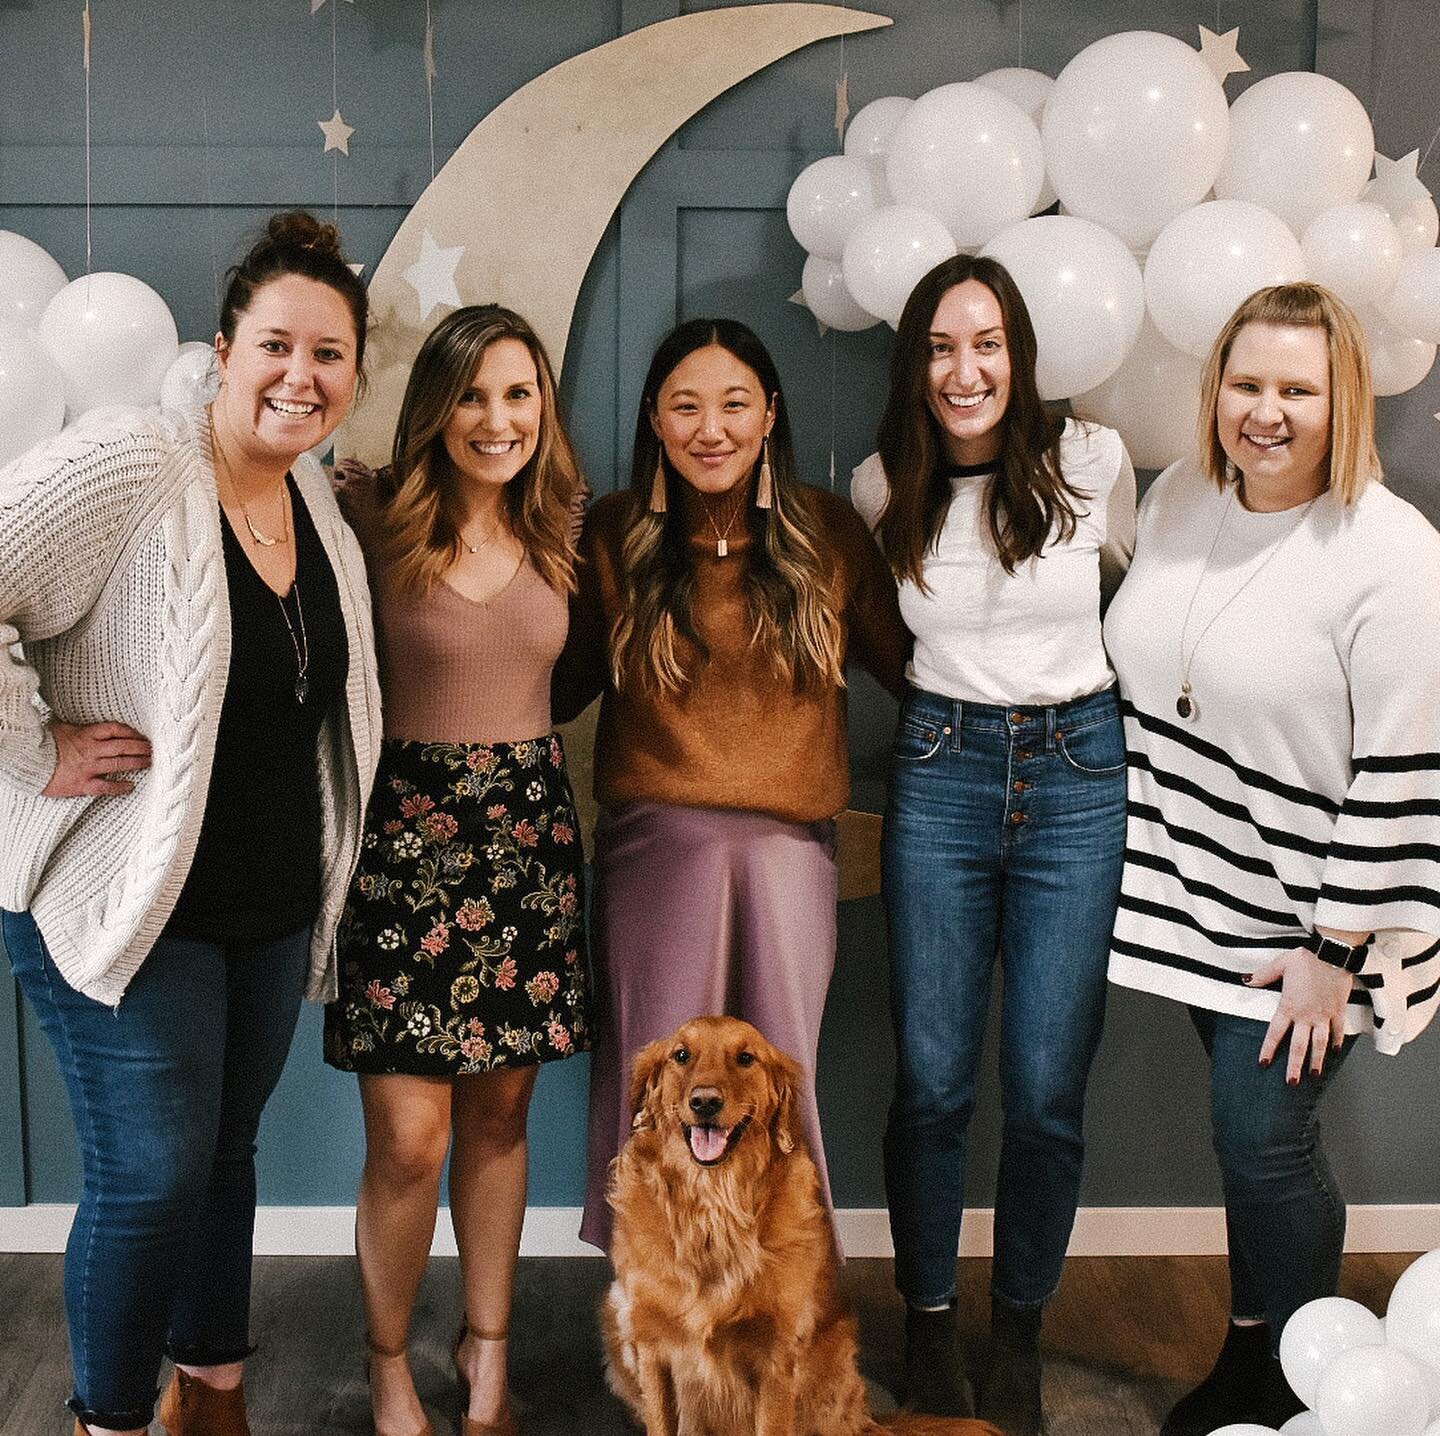 This past weekend we hosted a small baby shower for our bestie @lmpetruczenko 🌙 we all had so much fun planning this celebration and couldn&rsquo;t be more excited to meet our newest (probably cutest) bestie to our friend gang very soon! ⭐️🤍